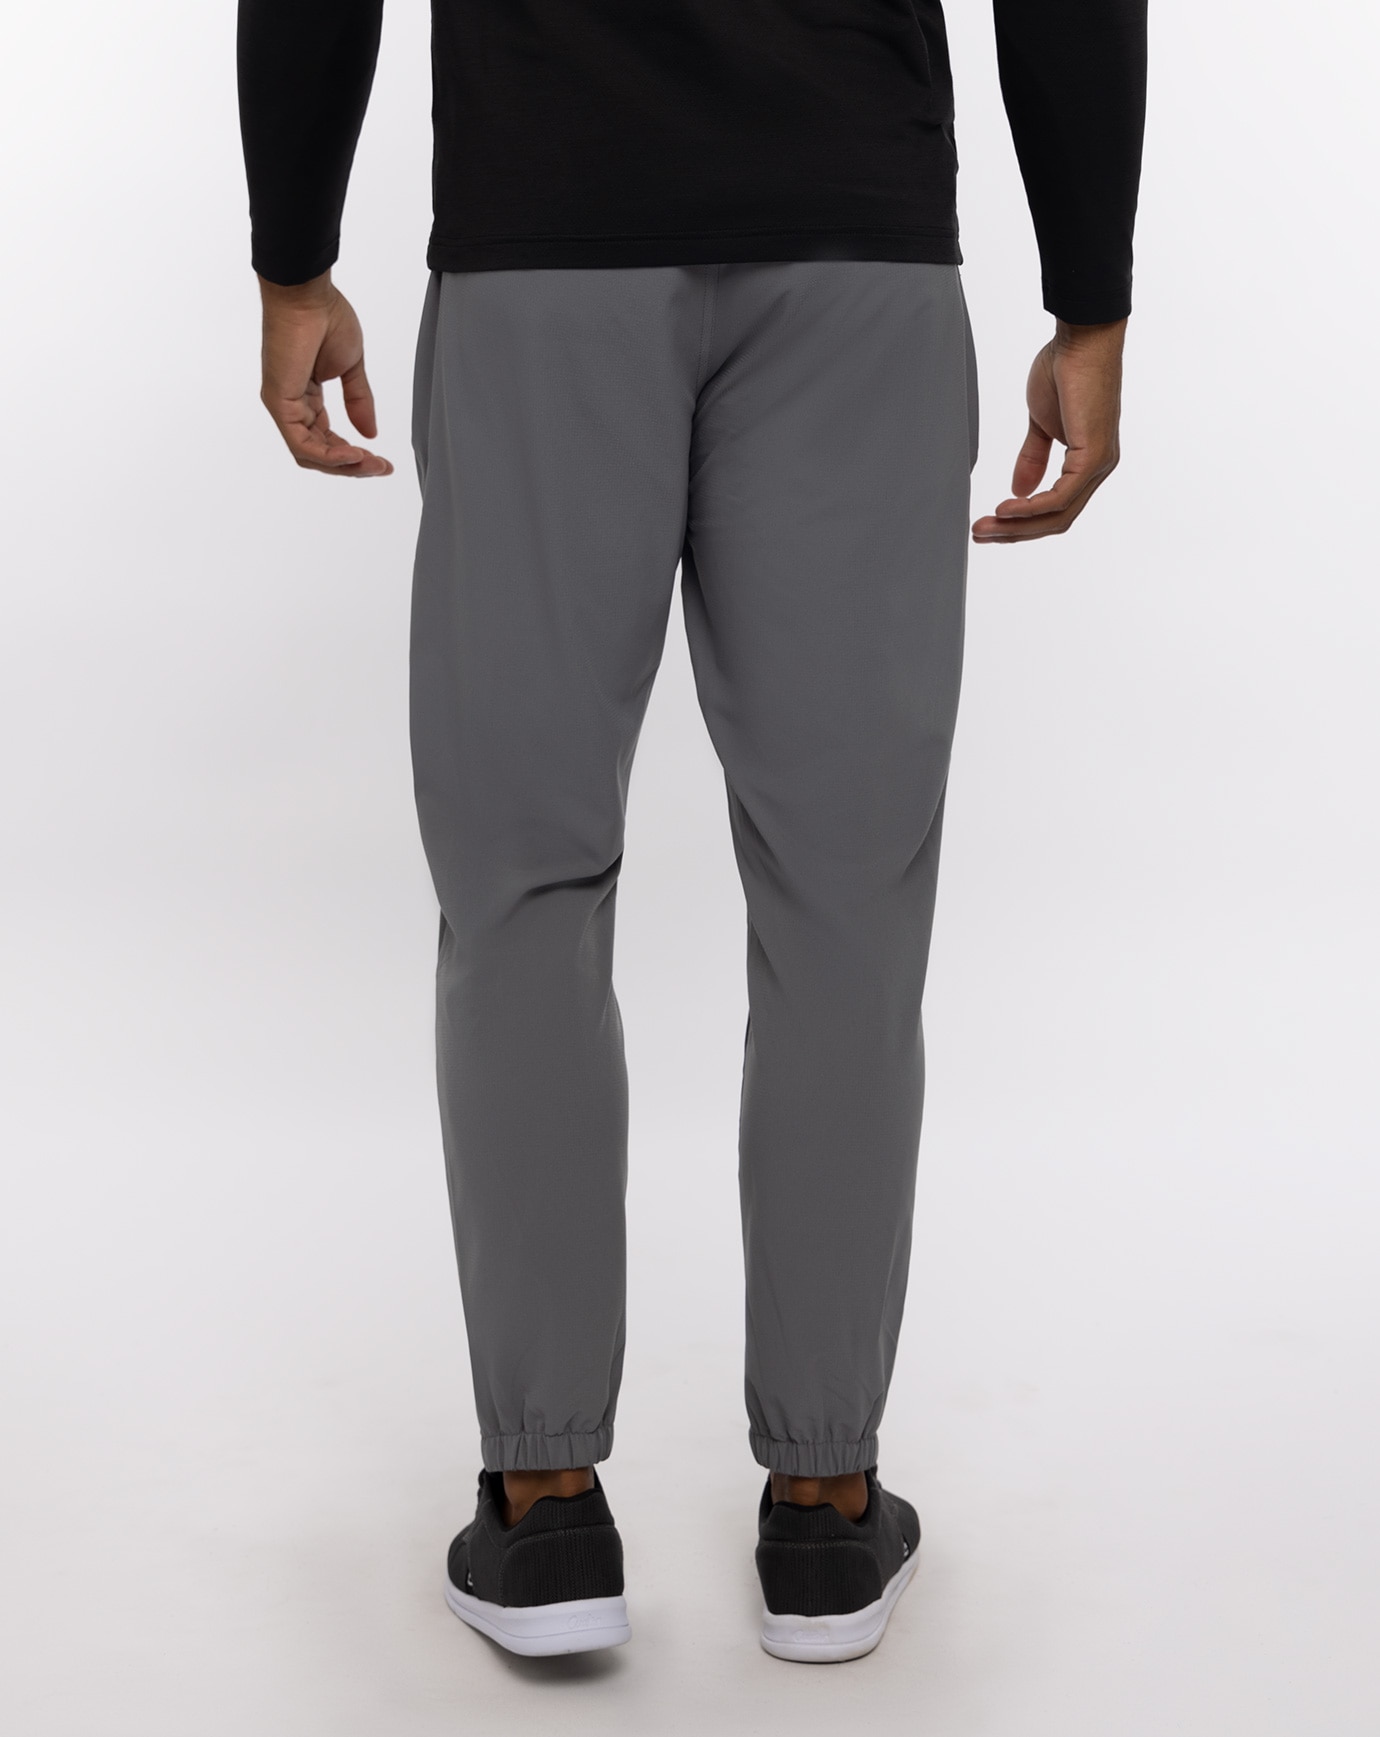 TRAVEL ACTIVE PANT 2.0